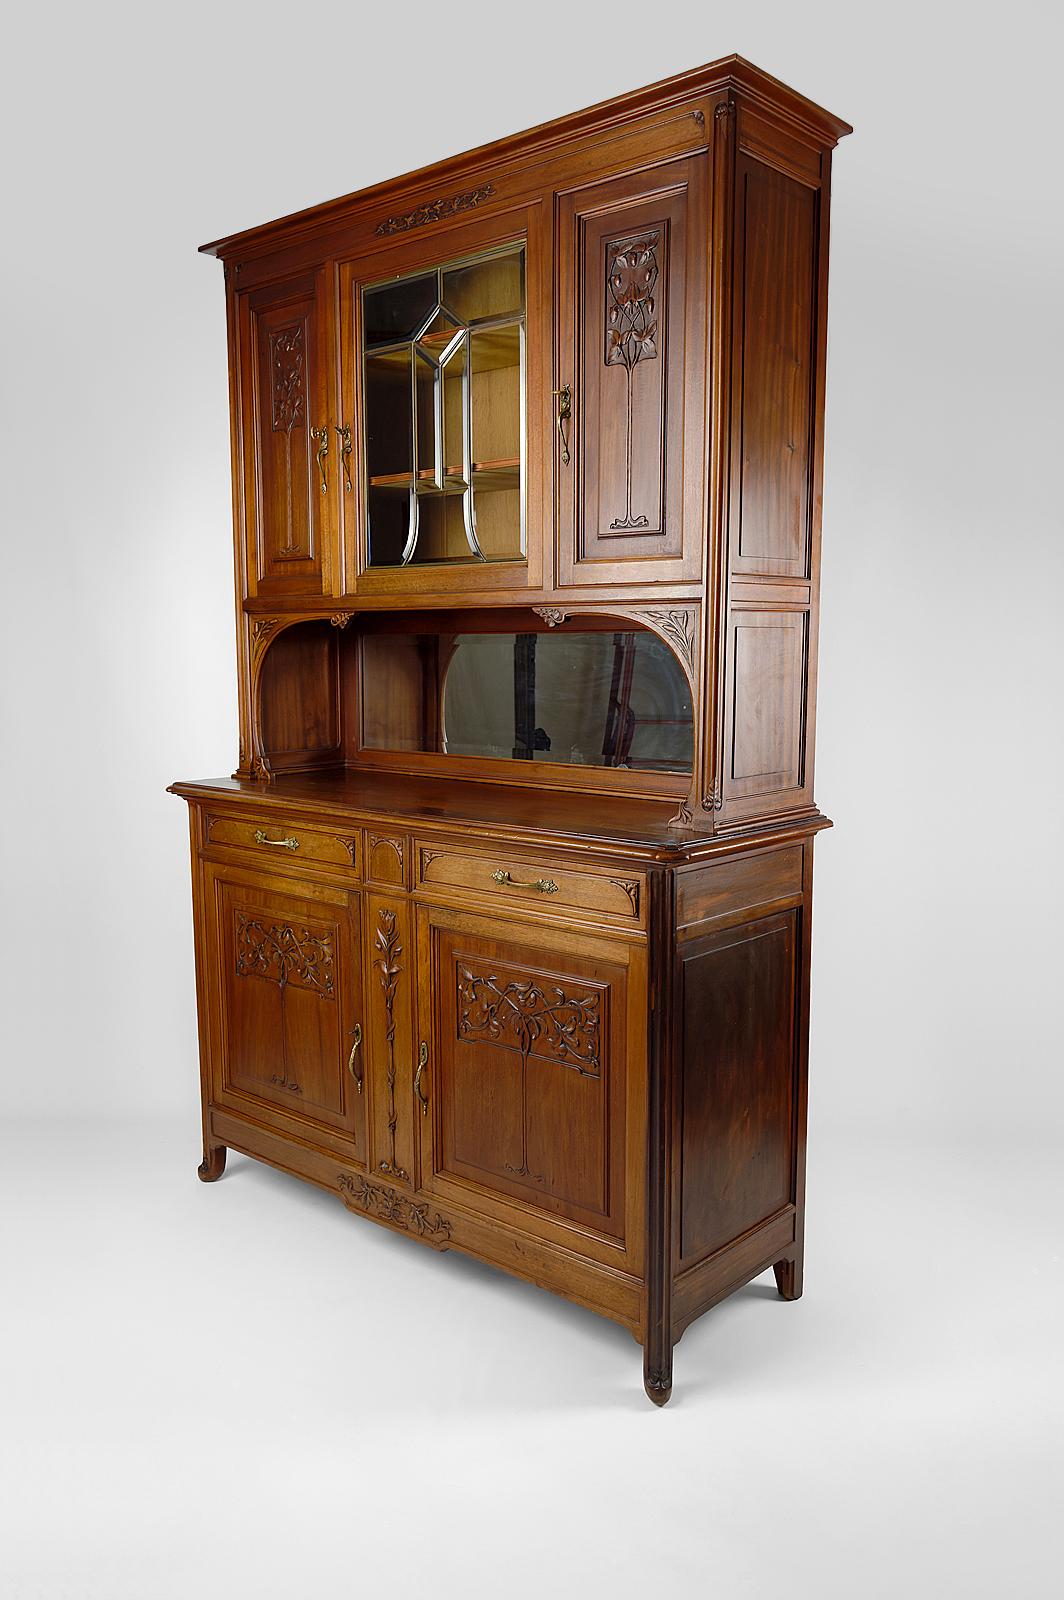 Beveled French Art Nouveau Sideboard in Carved Walnut with Stained Glass, circa 1910